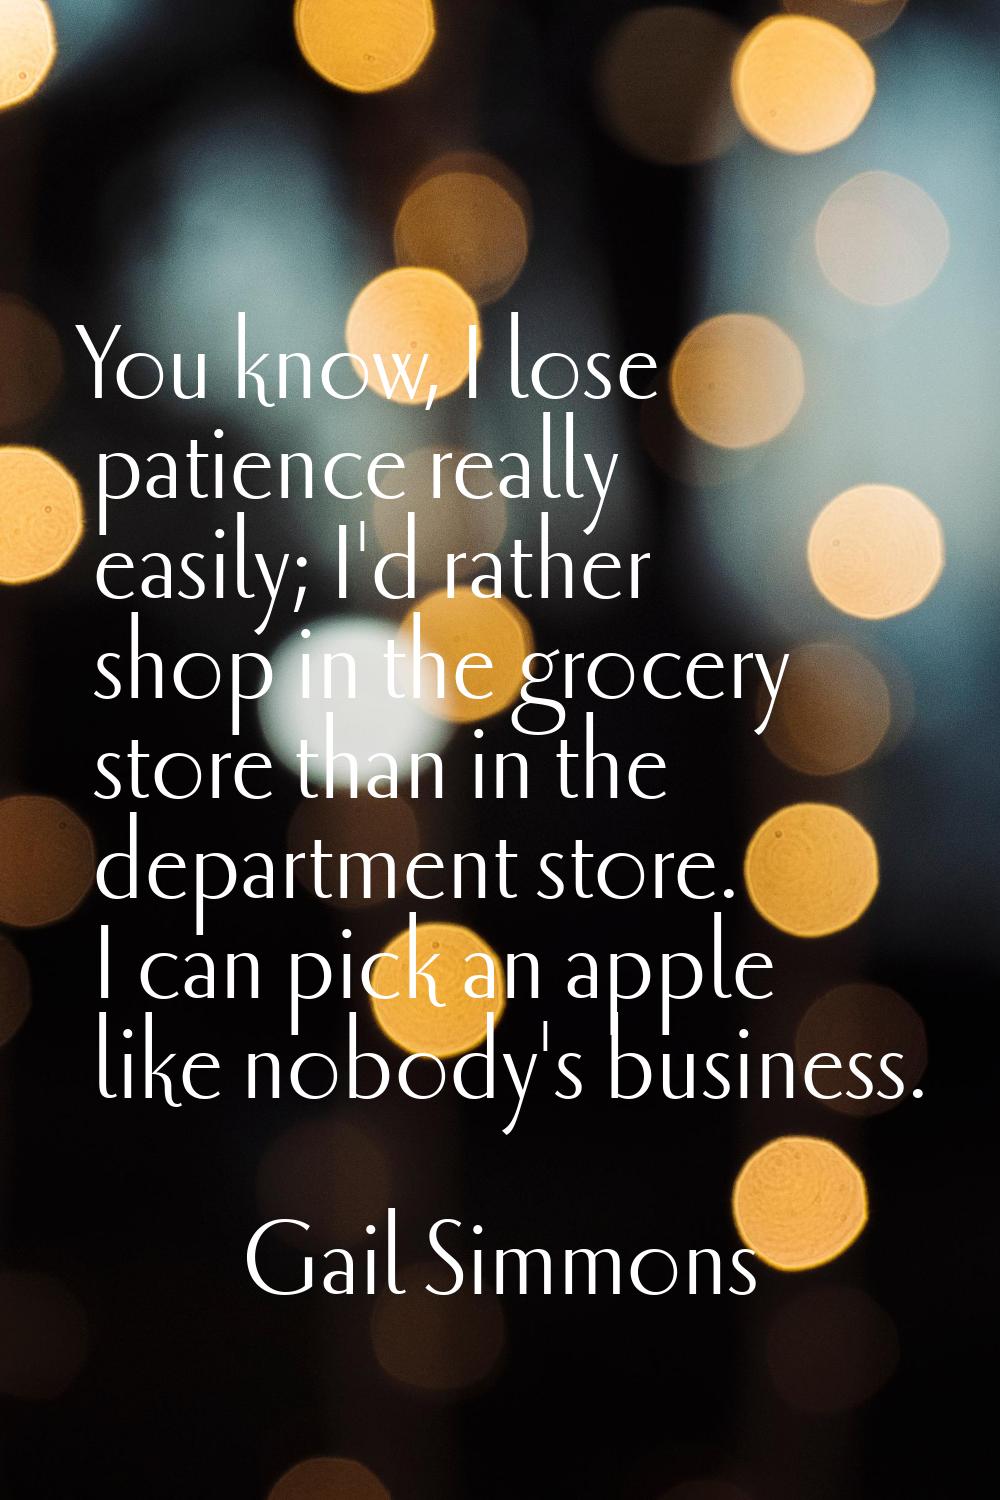 You know, I lose patience really easily; I'd rather shop in the grocery store than in the departmen